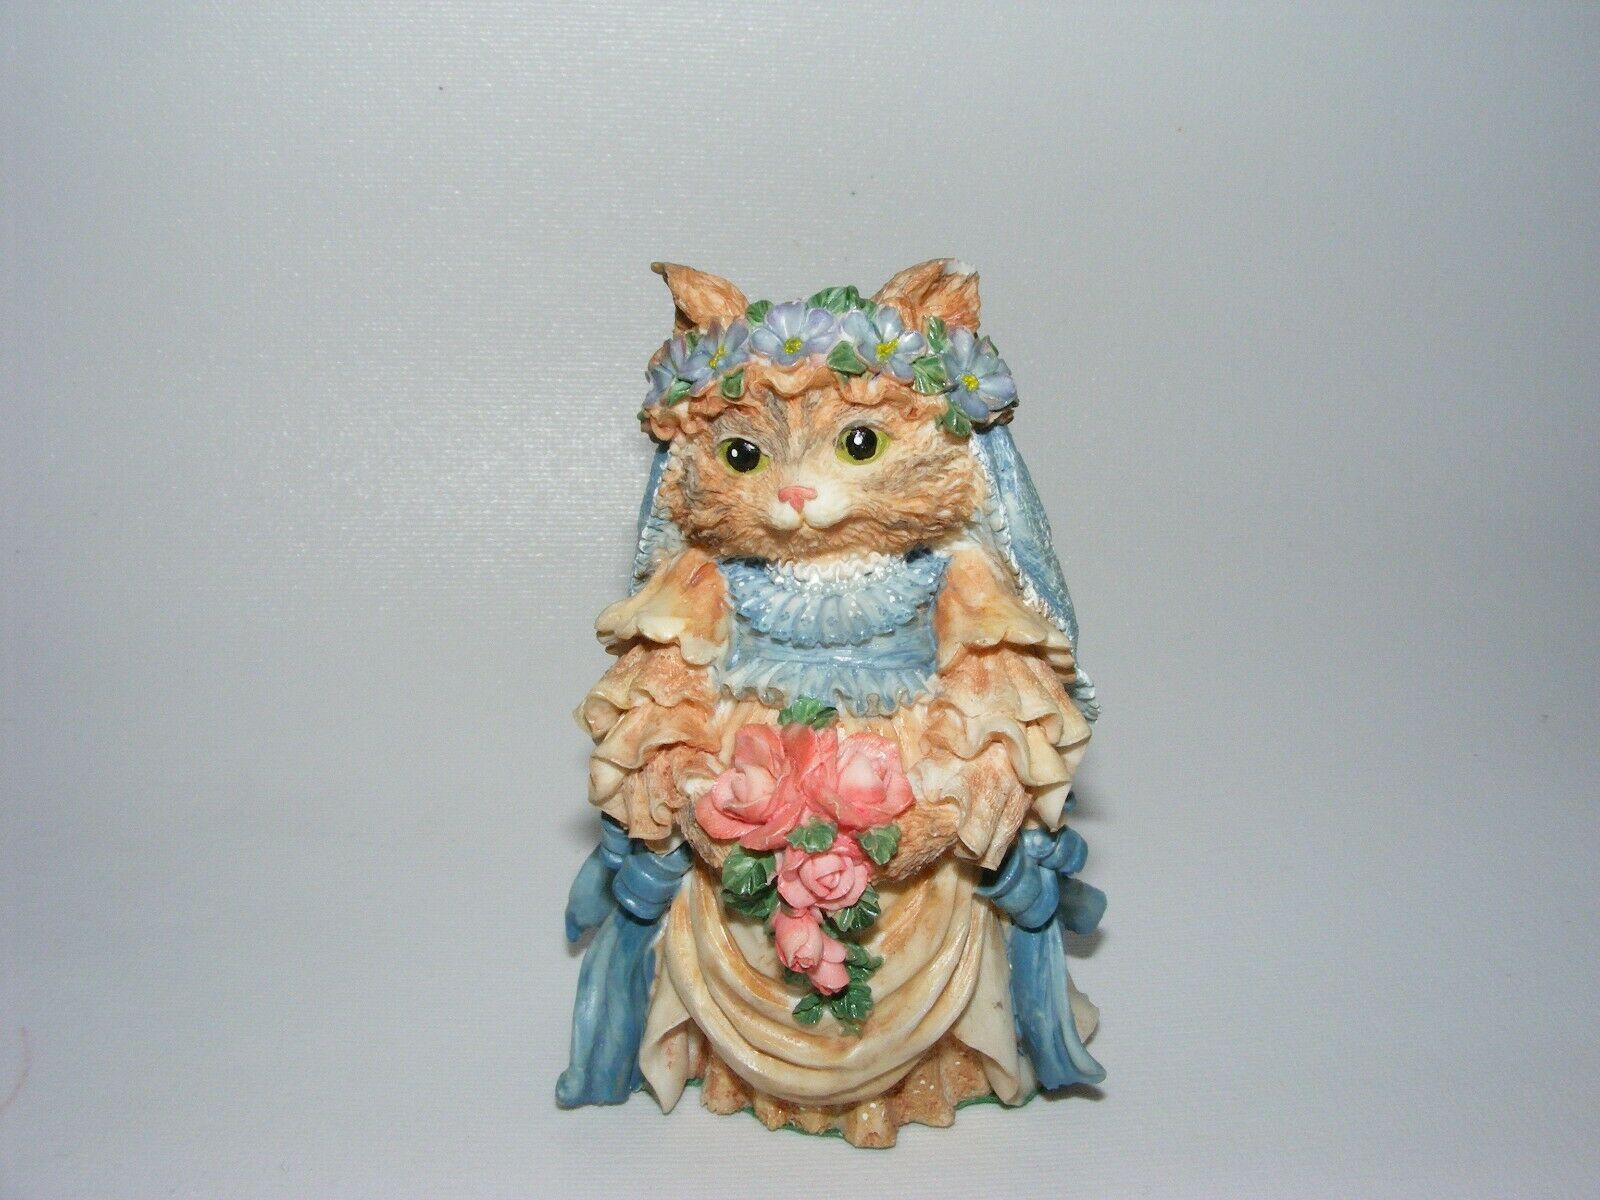 The Thickets At Sweetbriar Cat Figurine By Possible Dreams  Emily Feathers